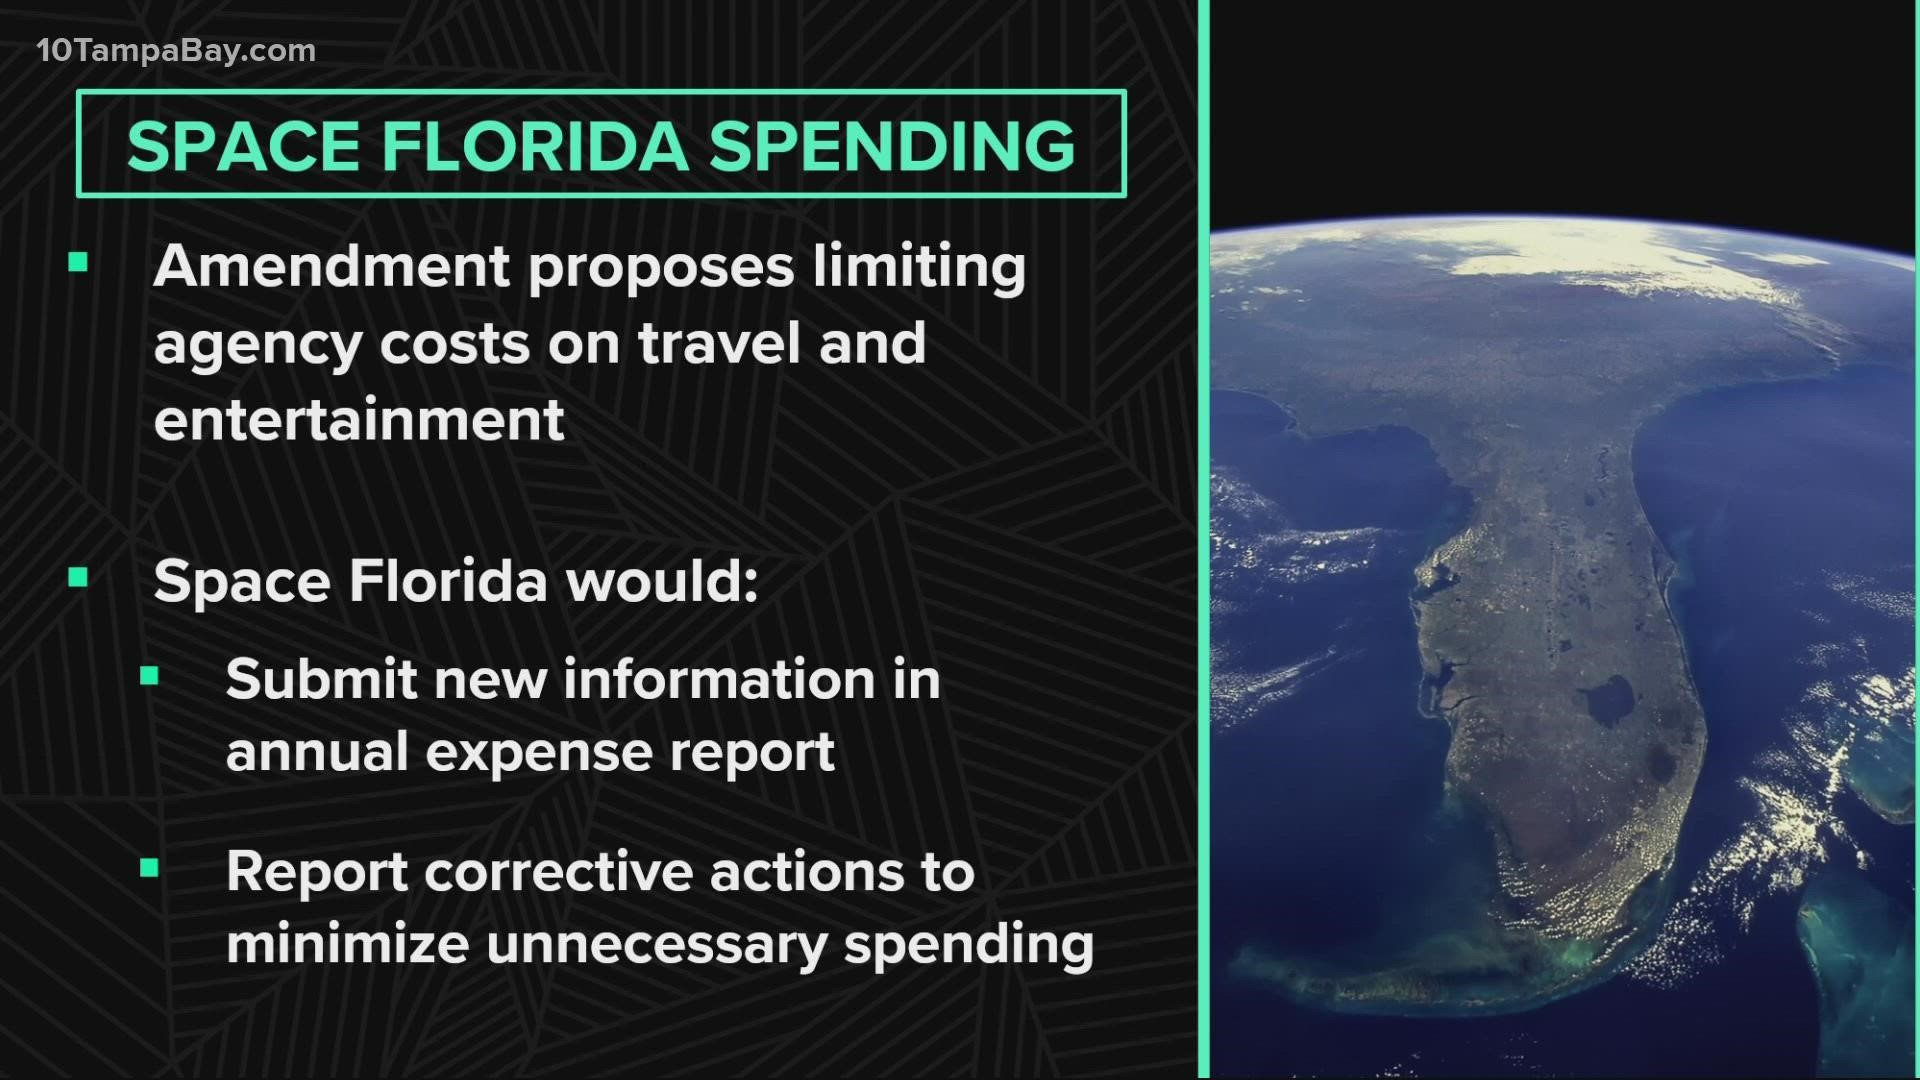 10 Investigates reported on Space Florida’s questionable entertainment and travel spending, using your tax dollars.